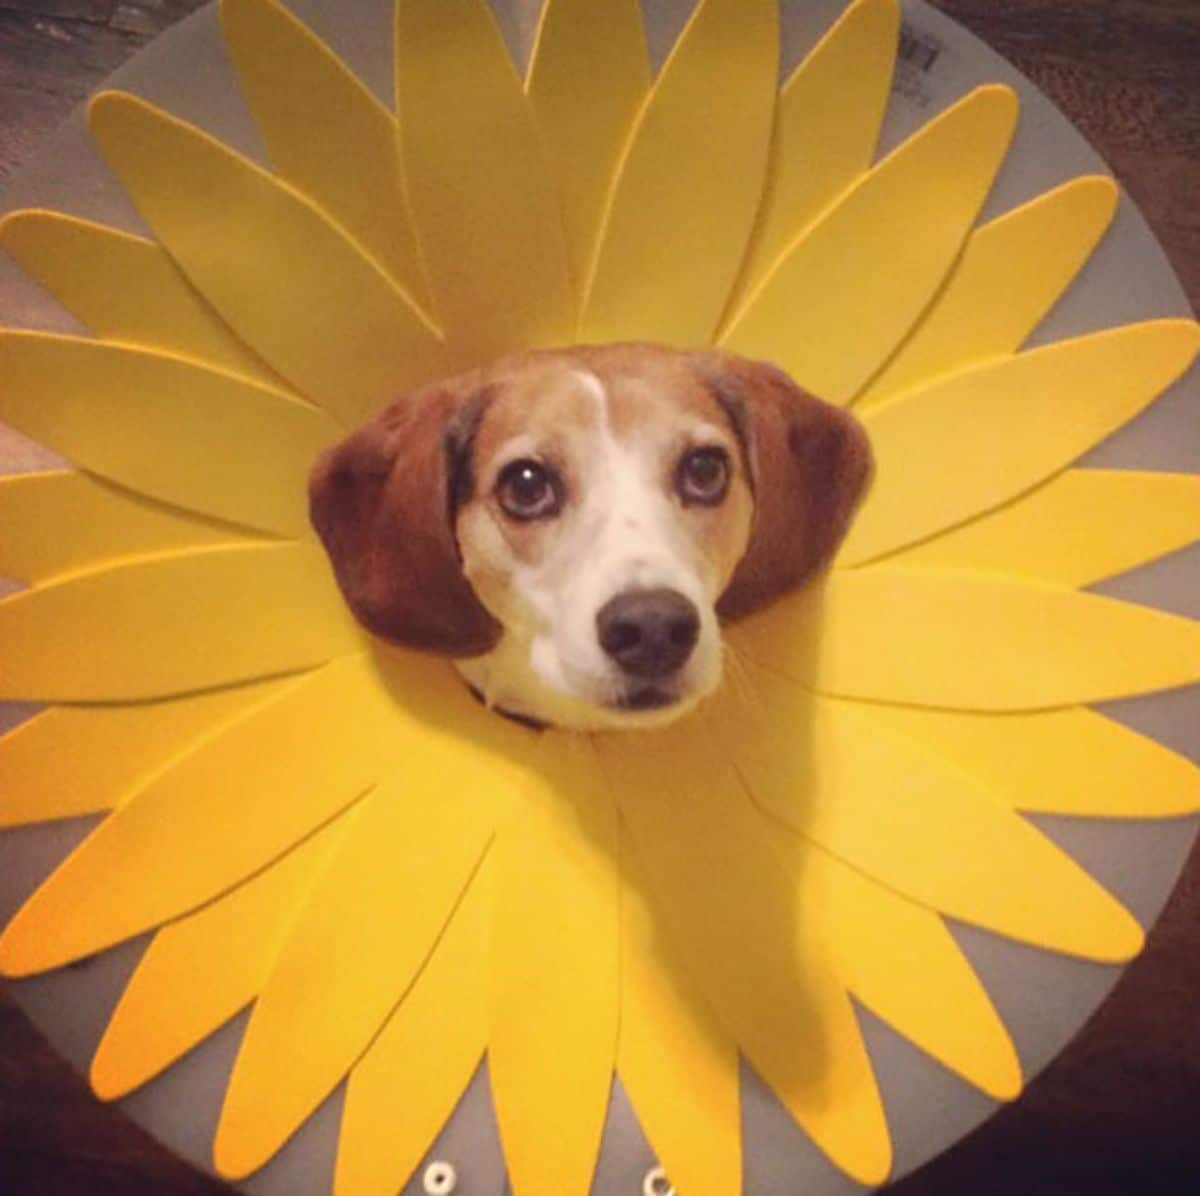 brown and white dog in a cone of shame with large yellow flower petals pasted on the inside